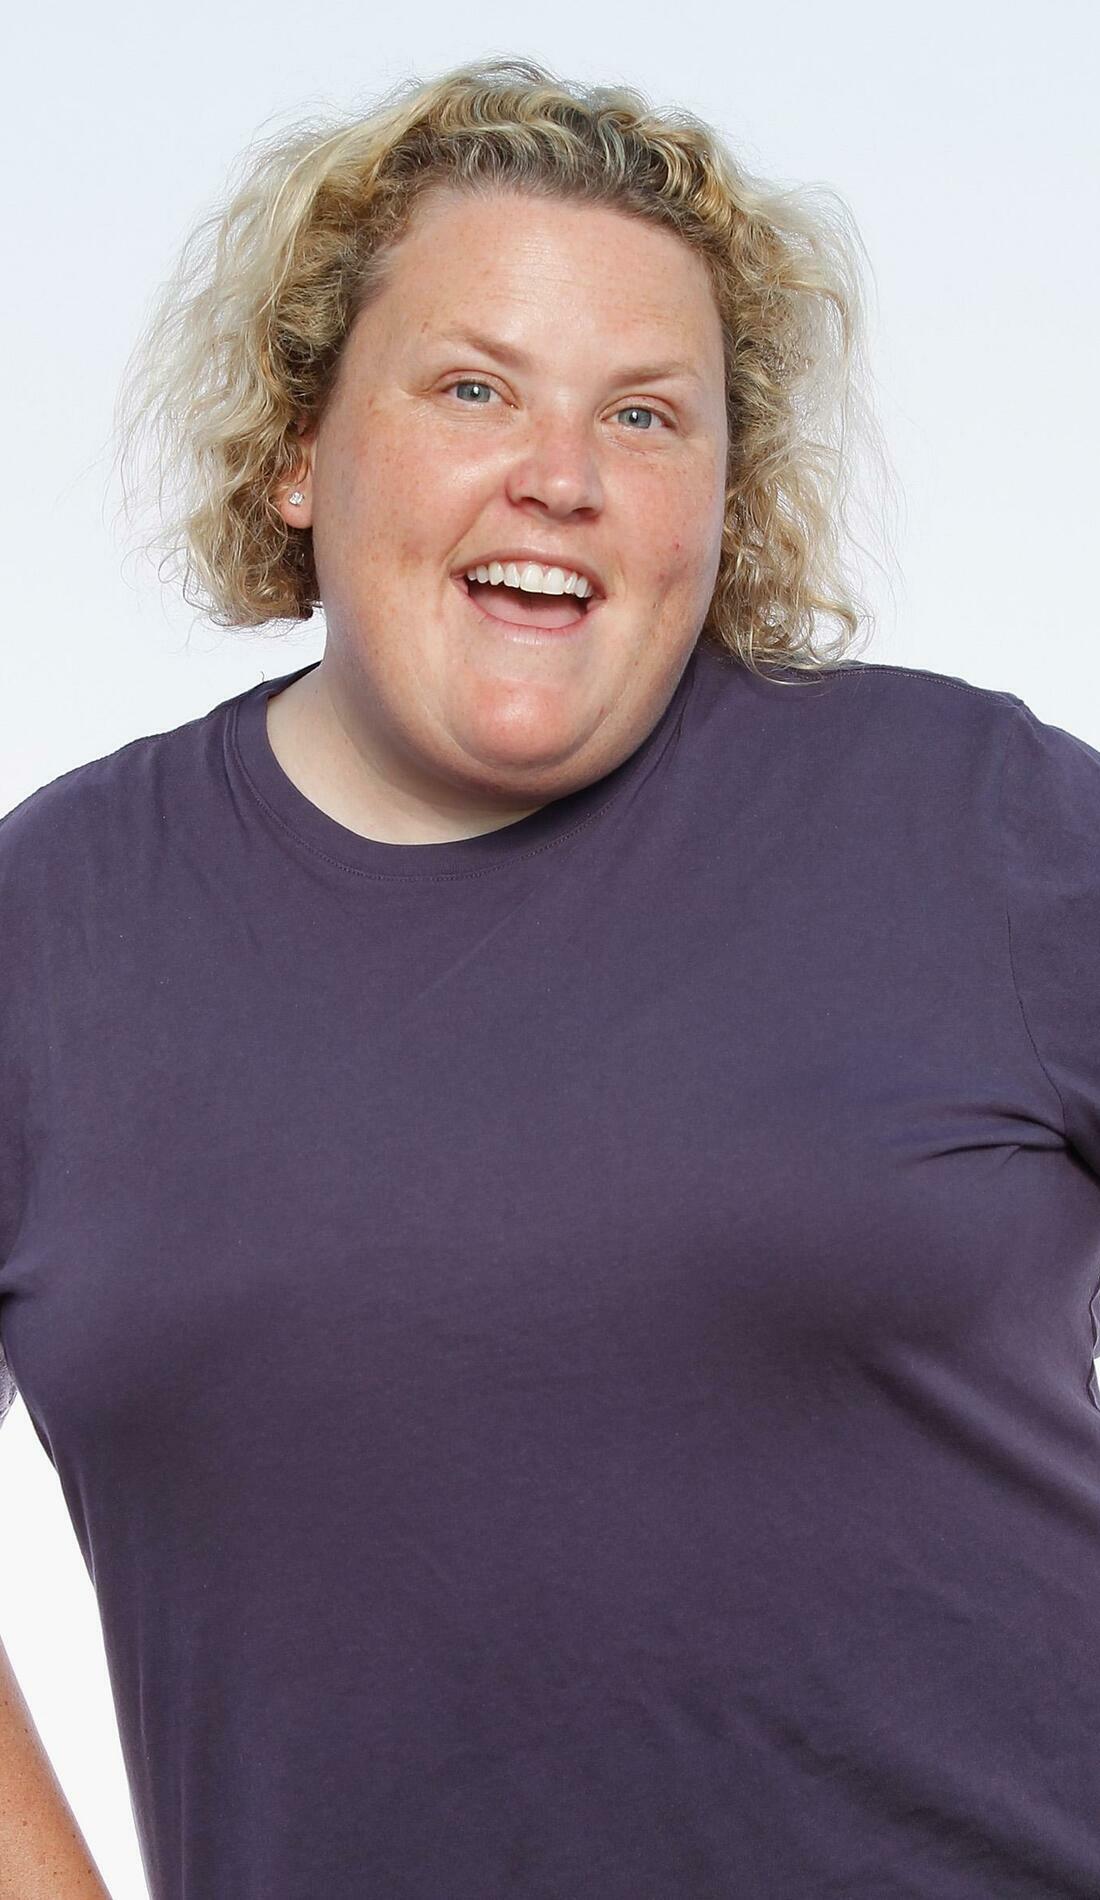 A Fortune Feimster live event